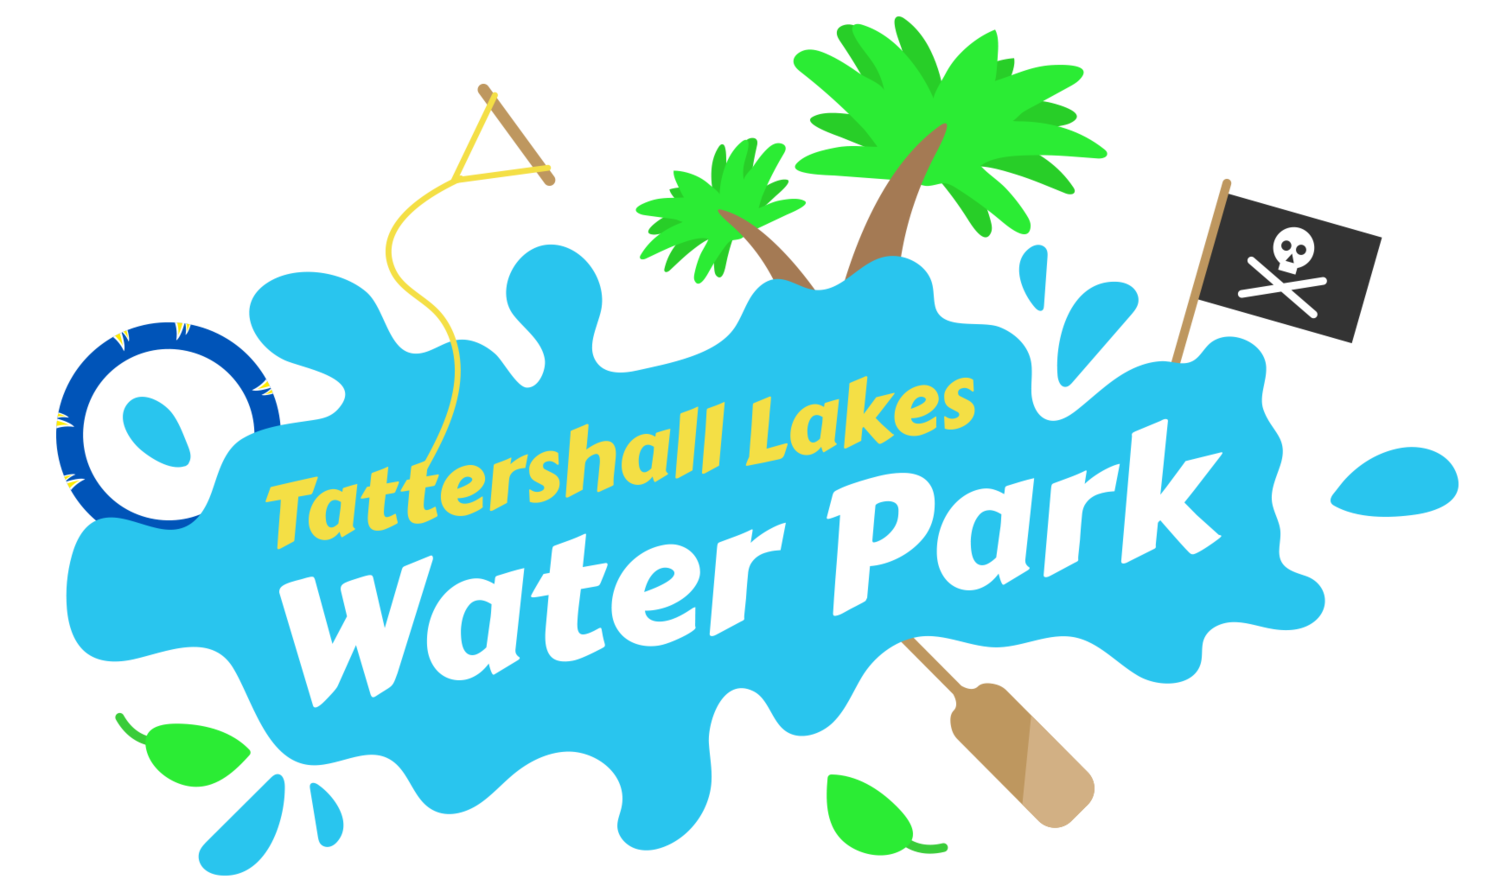 Tattershall Lakes Water Park, Cable and Aqua Park, Lincolnshire.